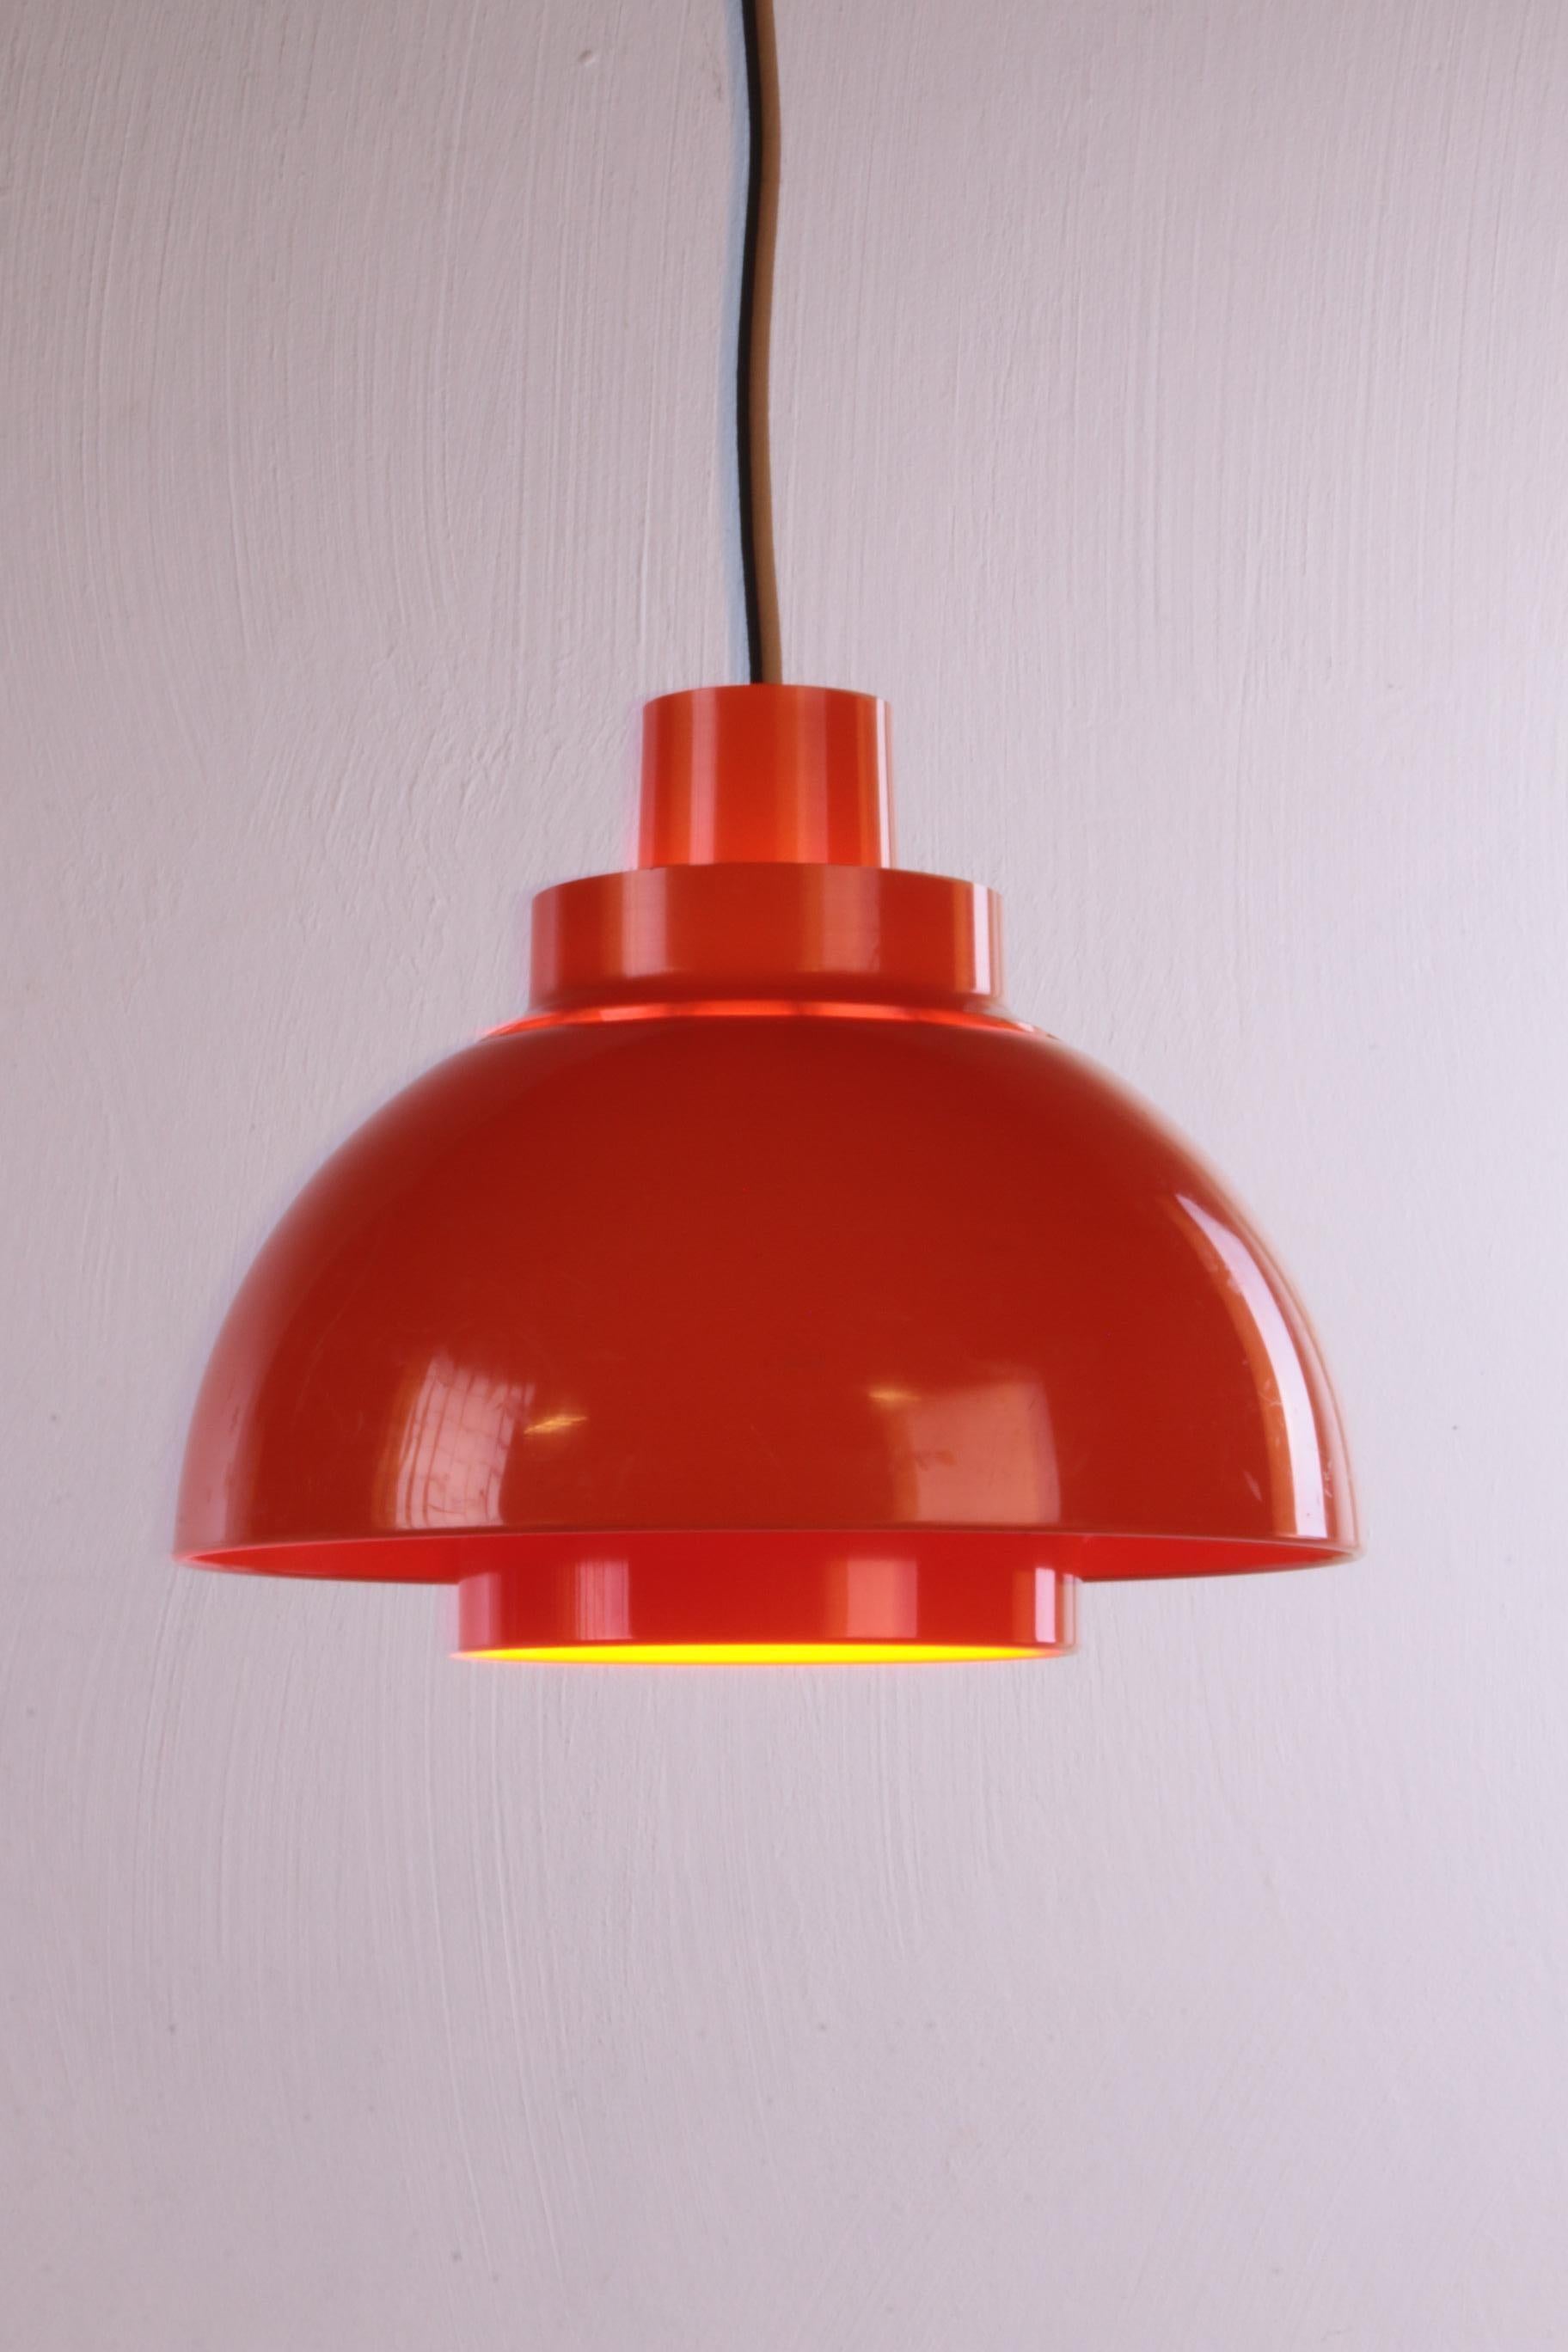 This beautiful Space Age Solar Minisol pendant lamp in a striking bright orange color will be a real eye-catcher at home.

Designed by K. Kewo for Nordisk Solar in the 1970s. The lamp is of very good quality for its age, as can be seen in the